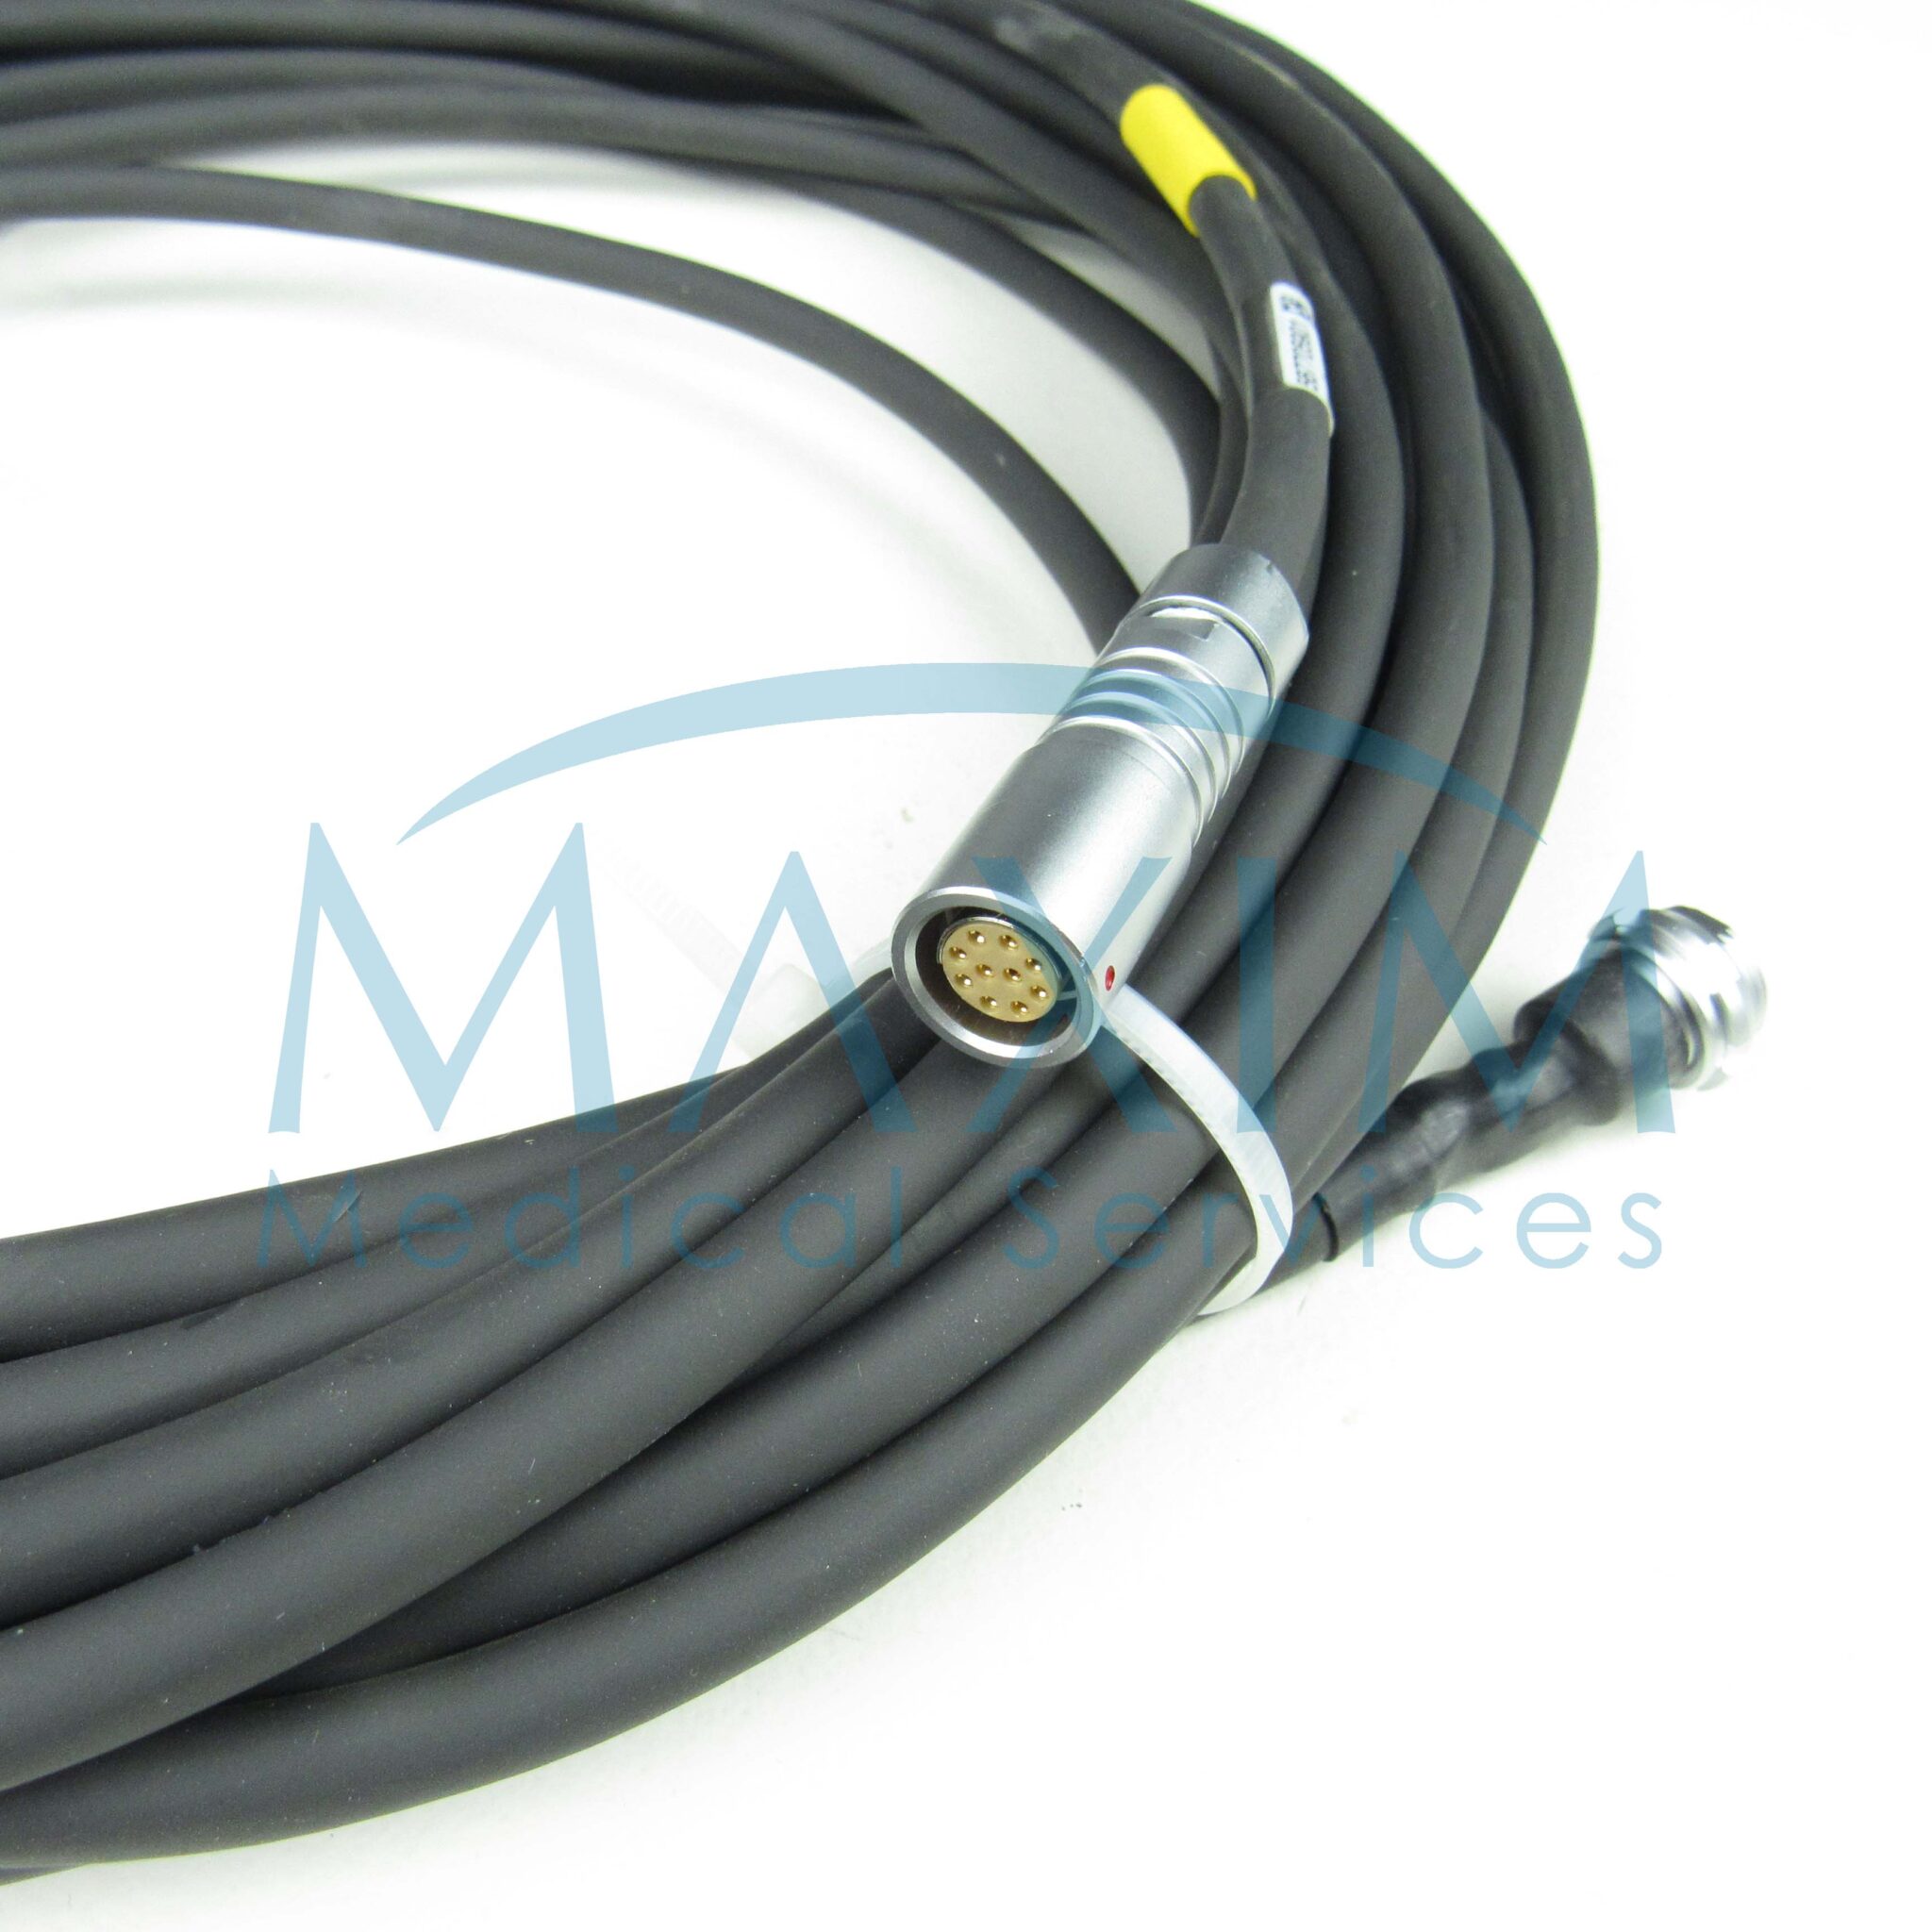 Maquet YUV Video Cable